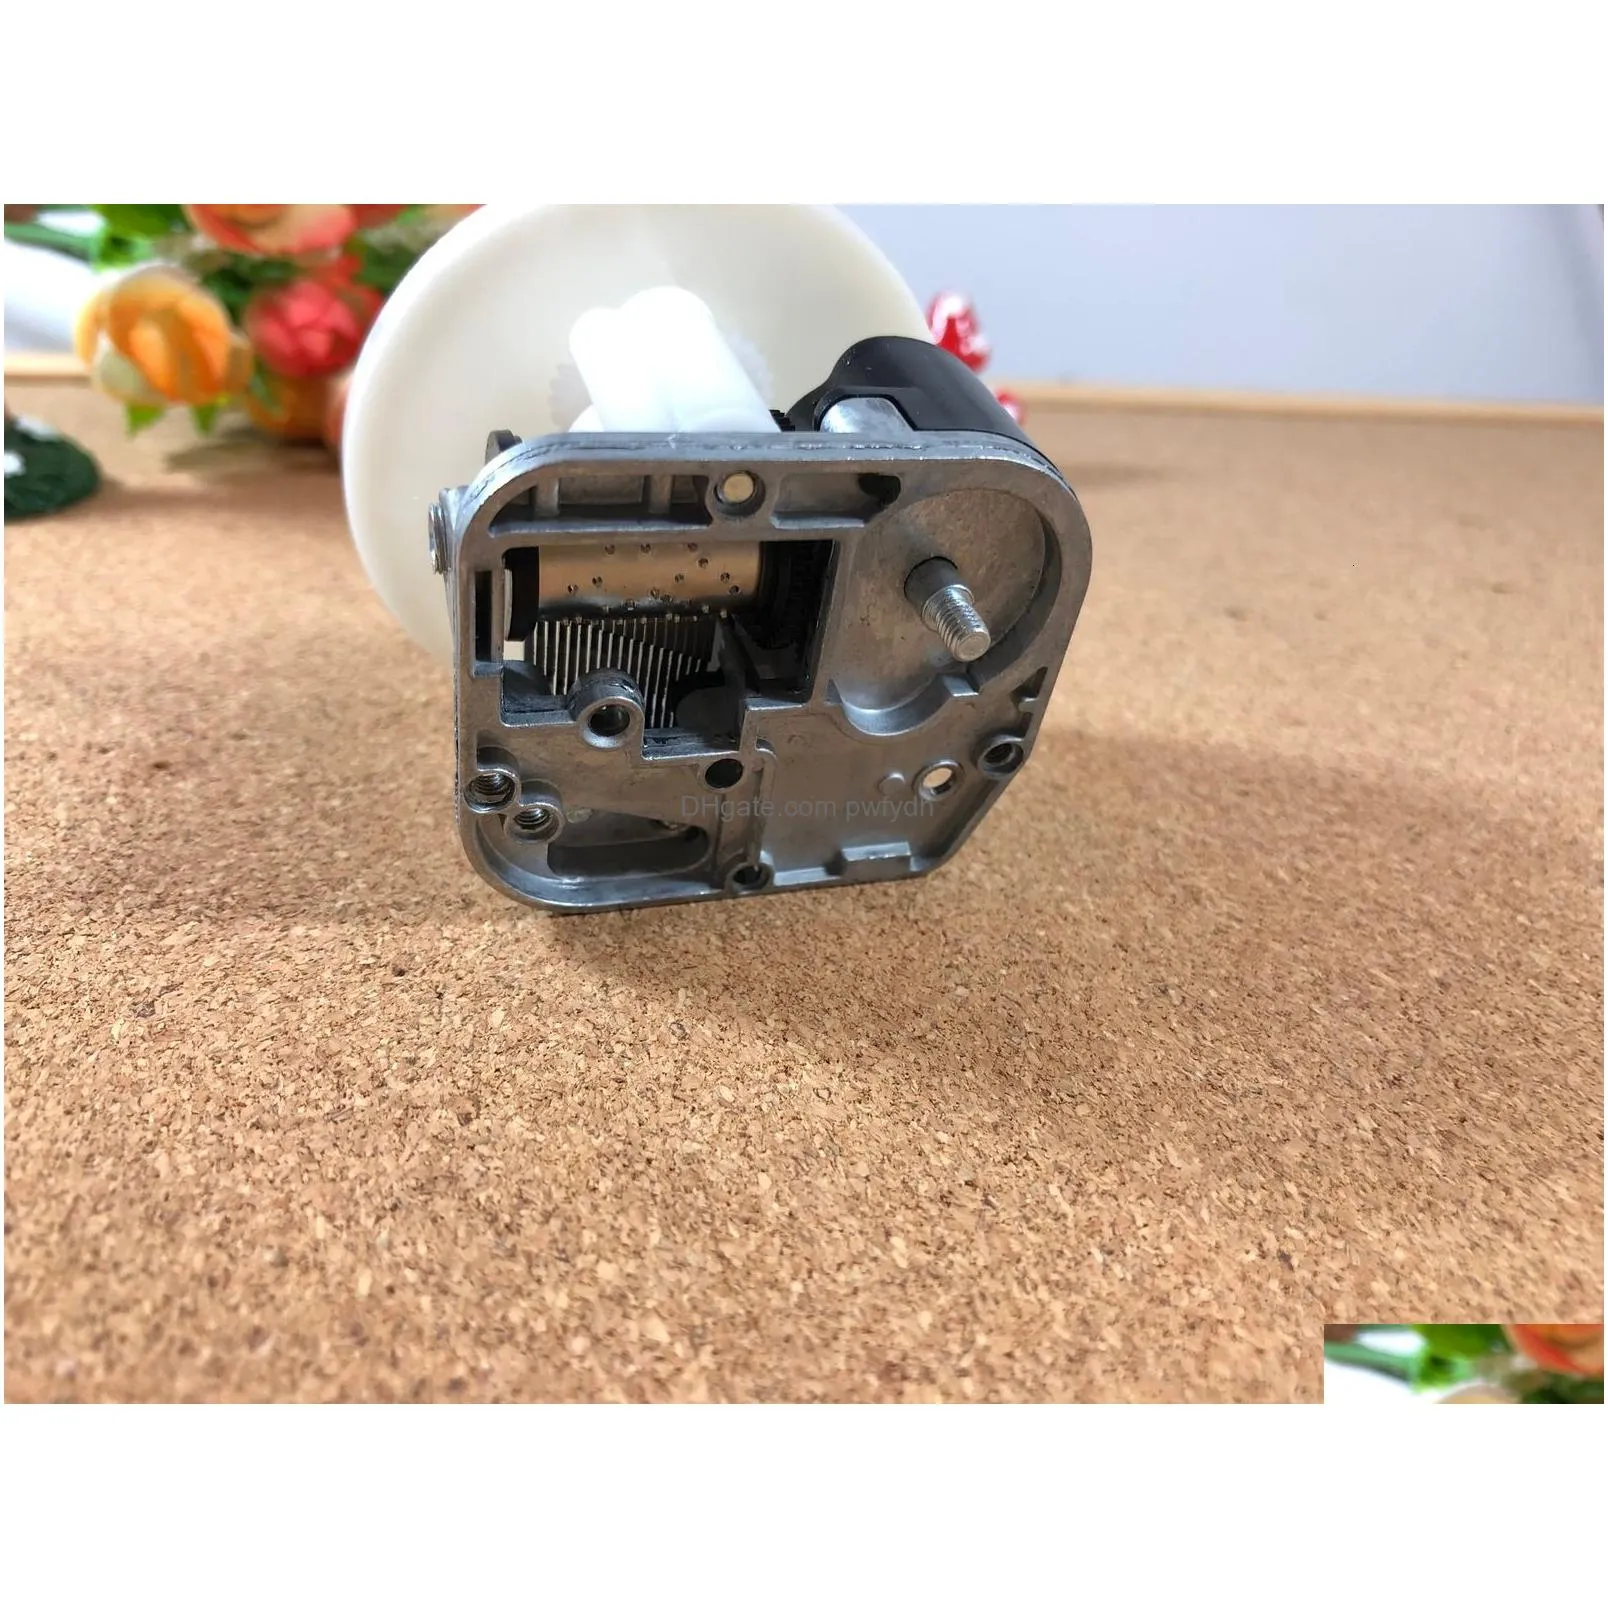 novelty items diy music box mechanism with rotating shaft and plate in contrary direction christmas gifts unusual 230707